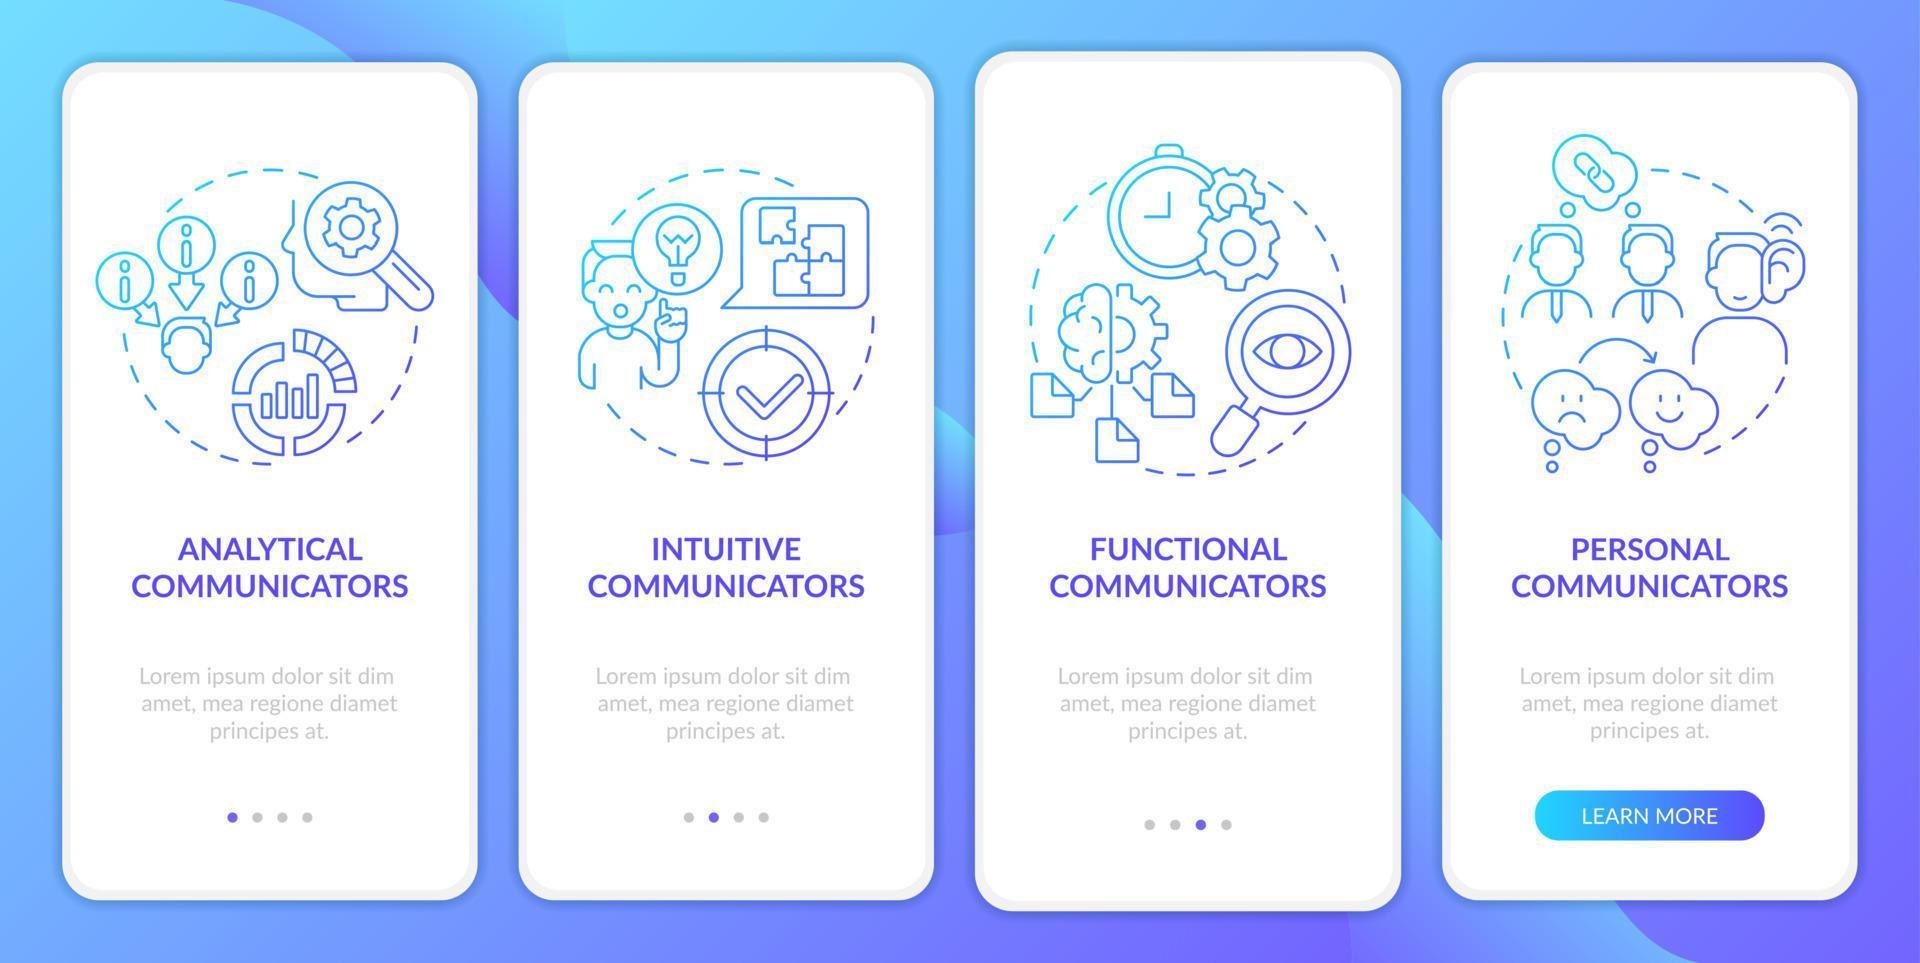 Types of communicators blue gradient onboarding mobile app screen. Walkthrough 4 steps graphic instructions pages with linear concepts. UI, UX, GUI template. vector